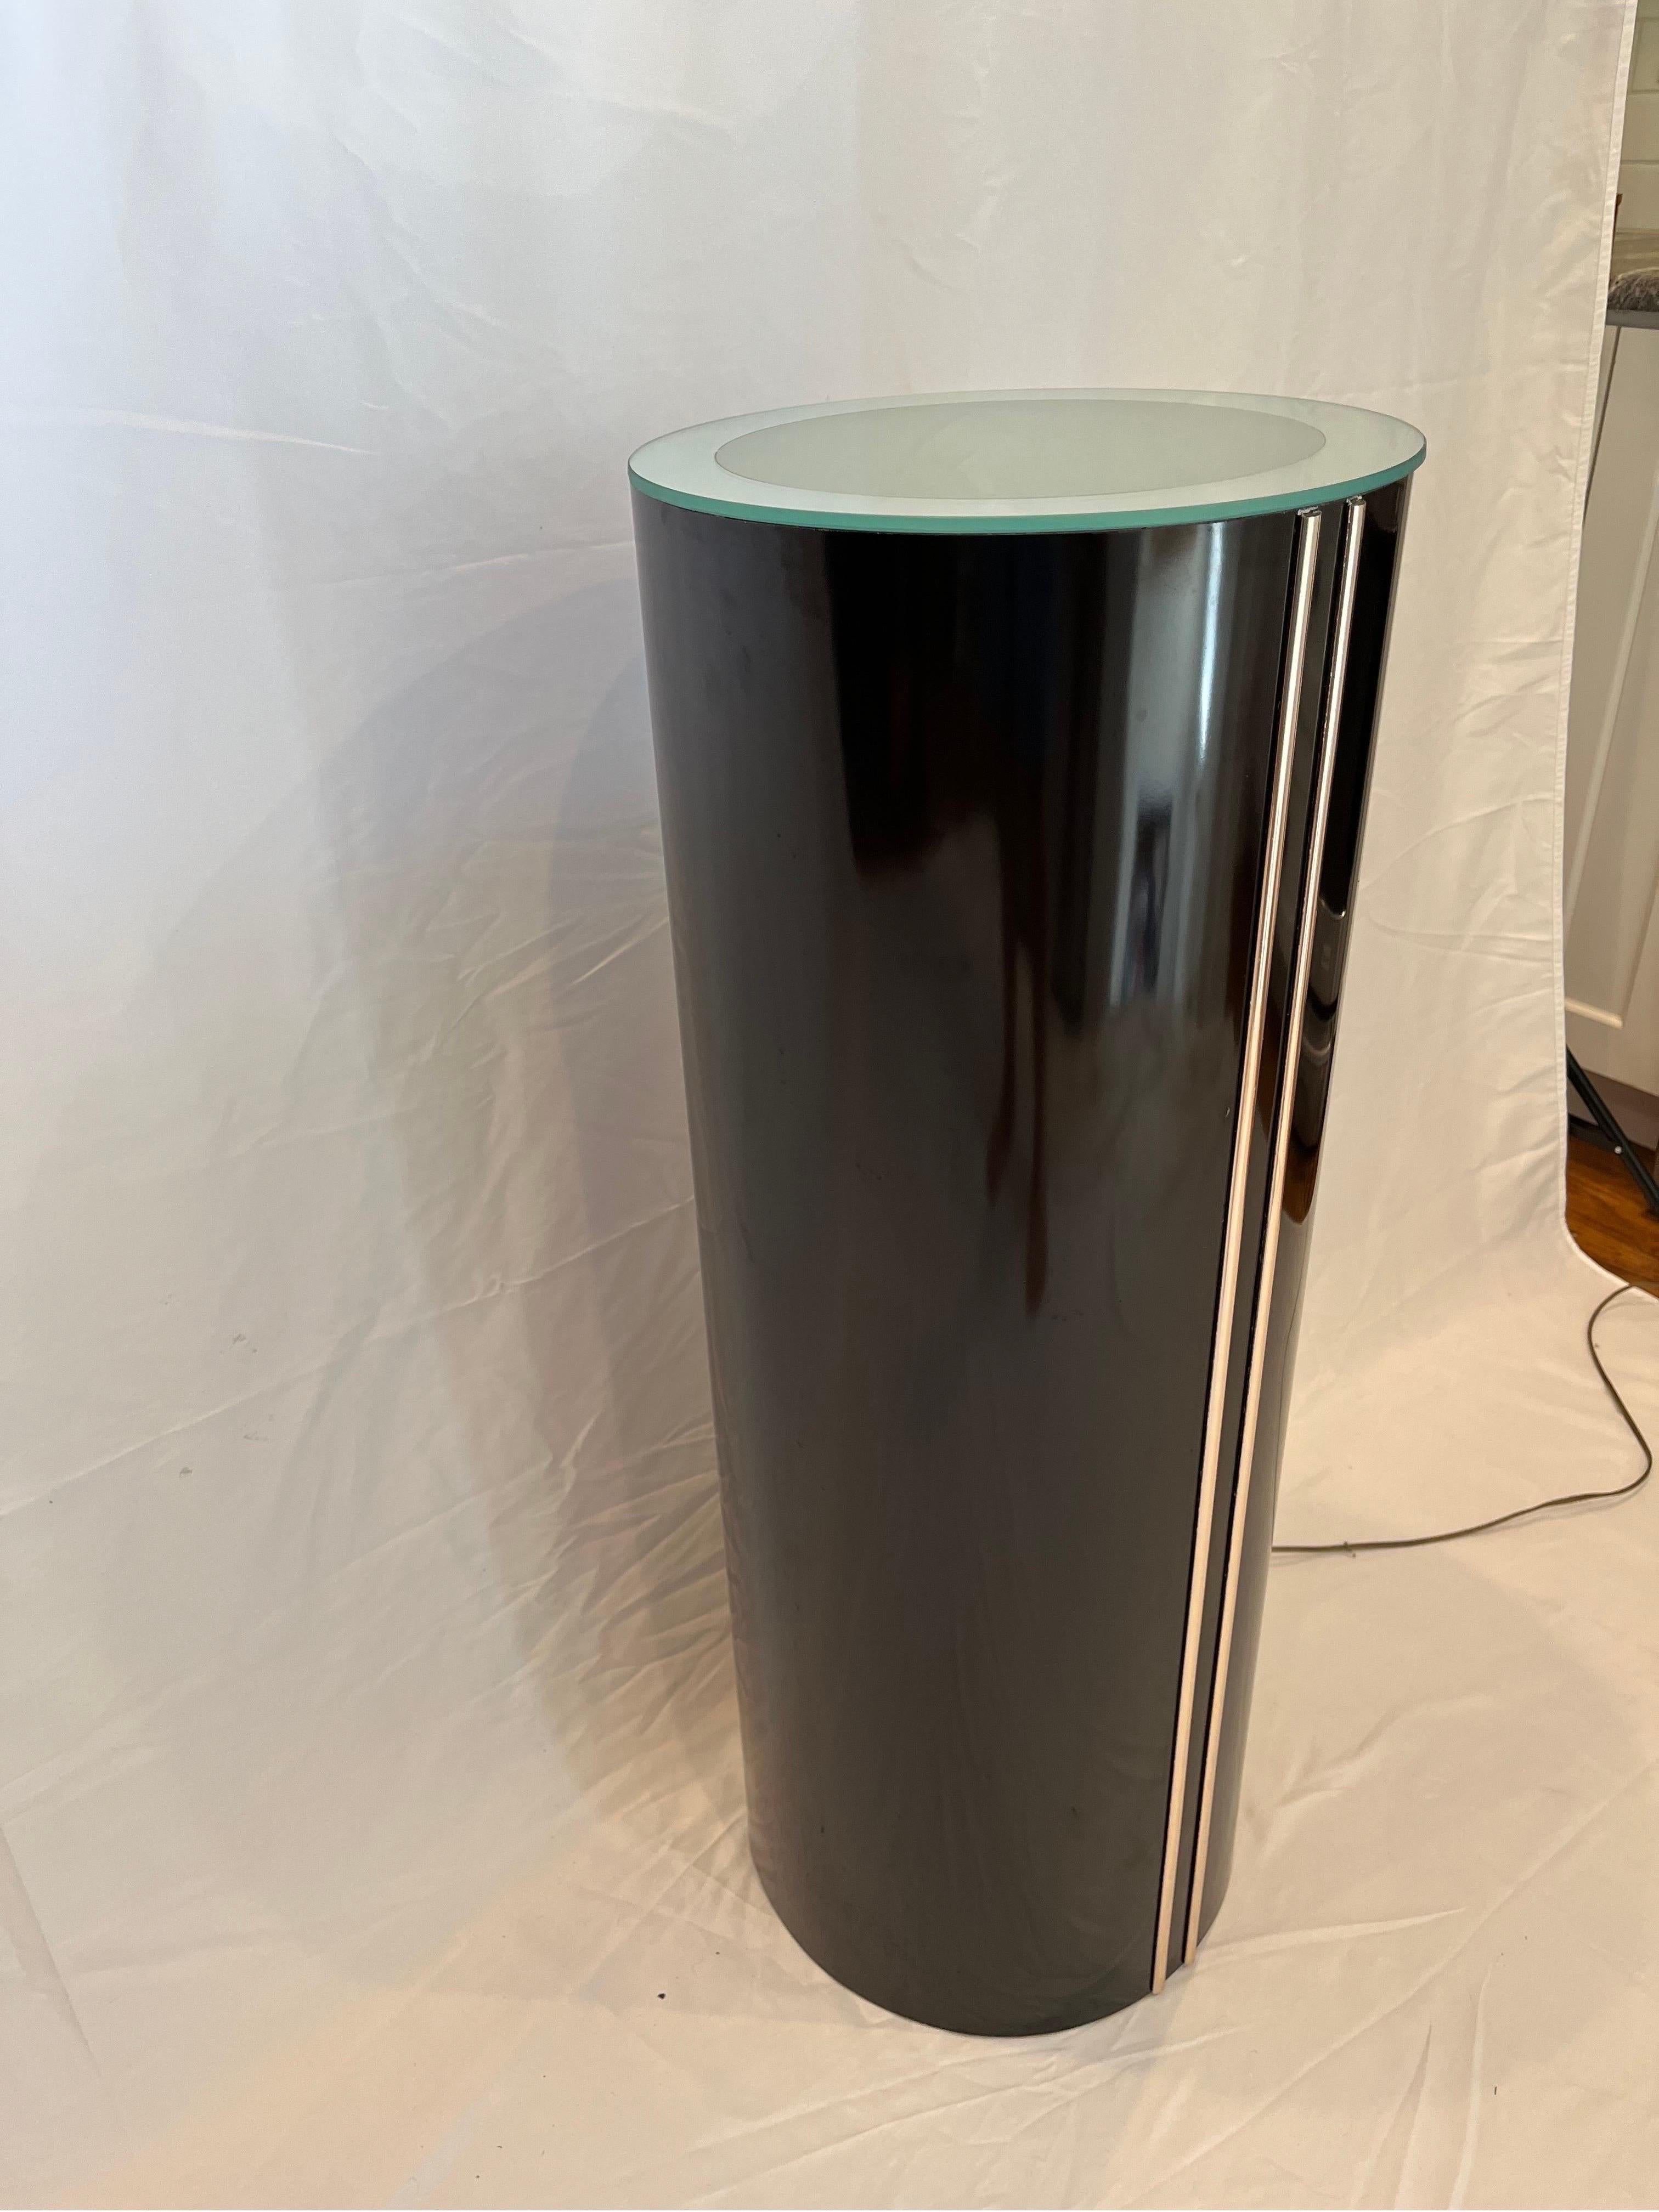 Postmodern lighted pedestal with mirror rimmed frosted glass top. High gloss black pedestal with 2 raised vertical gold accent stripes. 